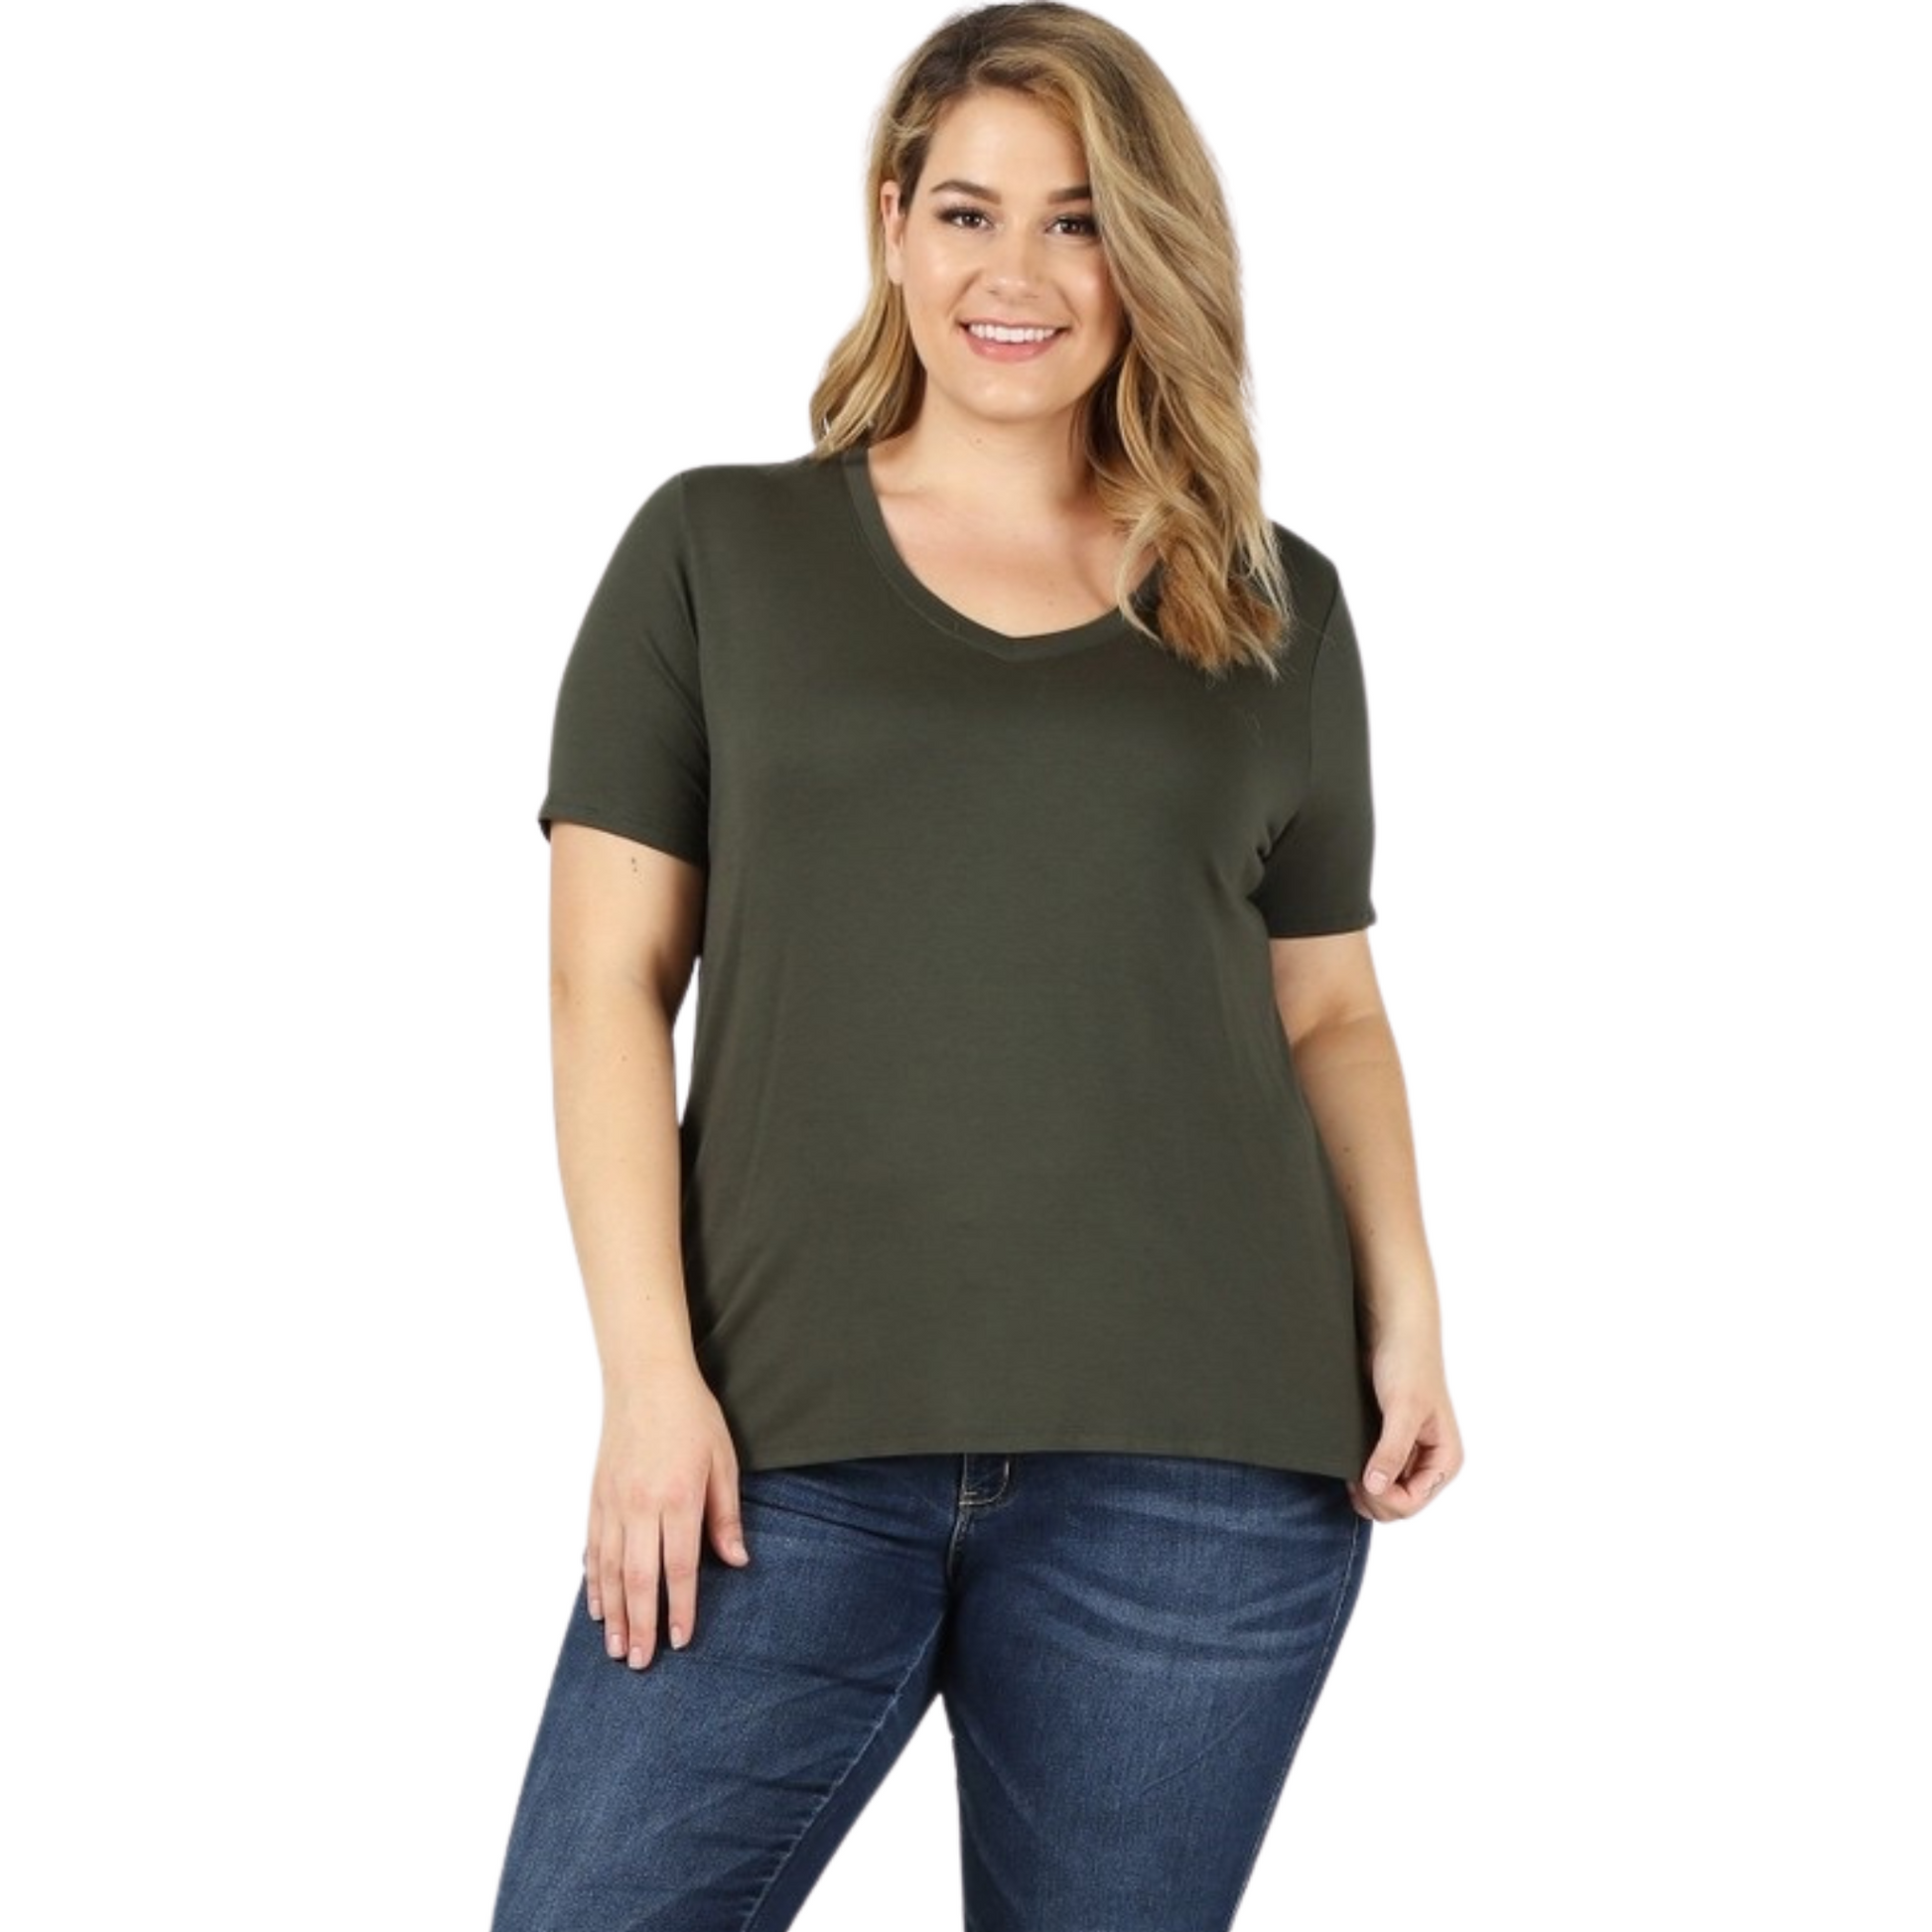 Plus size v-neck tee in green